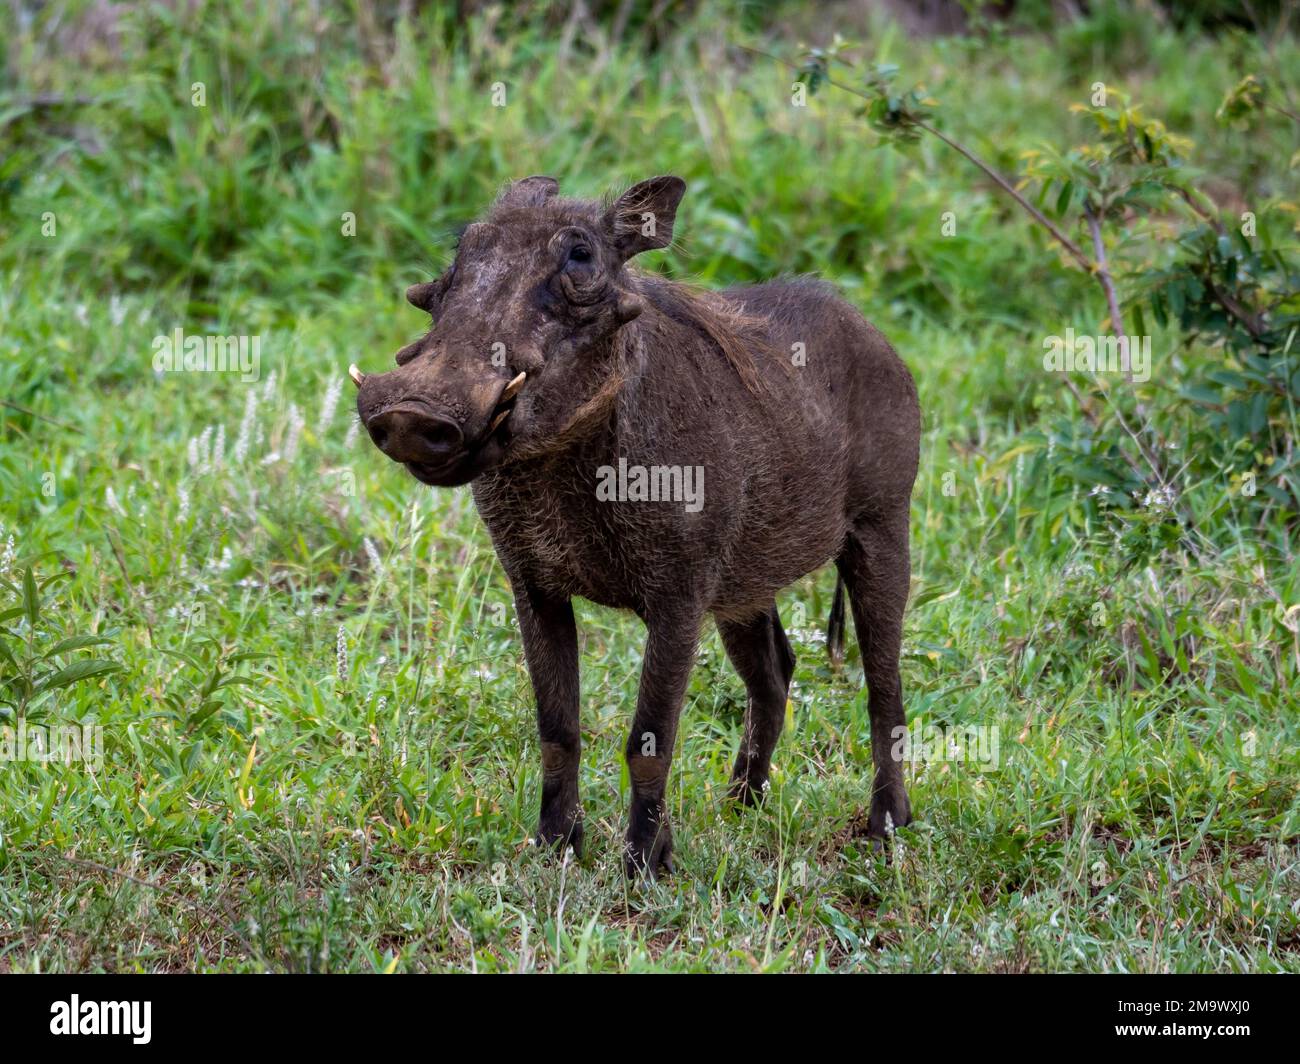 A Common Warthog (Phacochoerus africanus) standing on grass. Kruger National Park, South Africa. Stock Photo